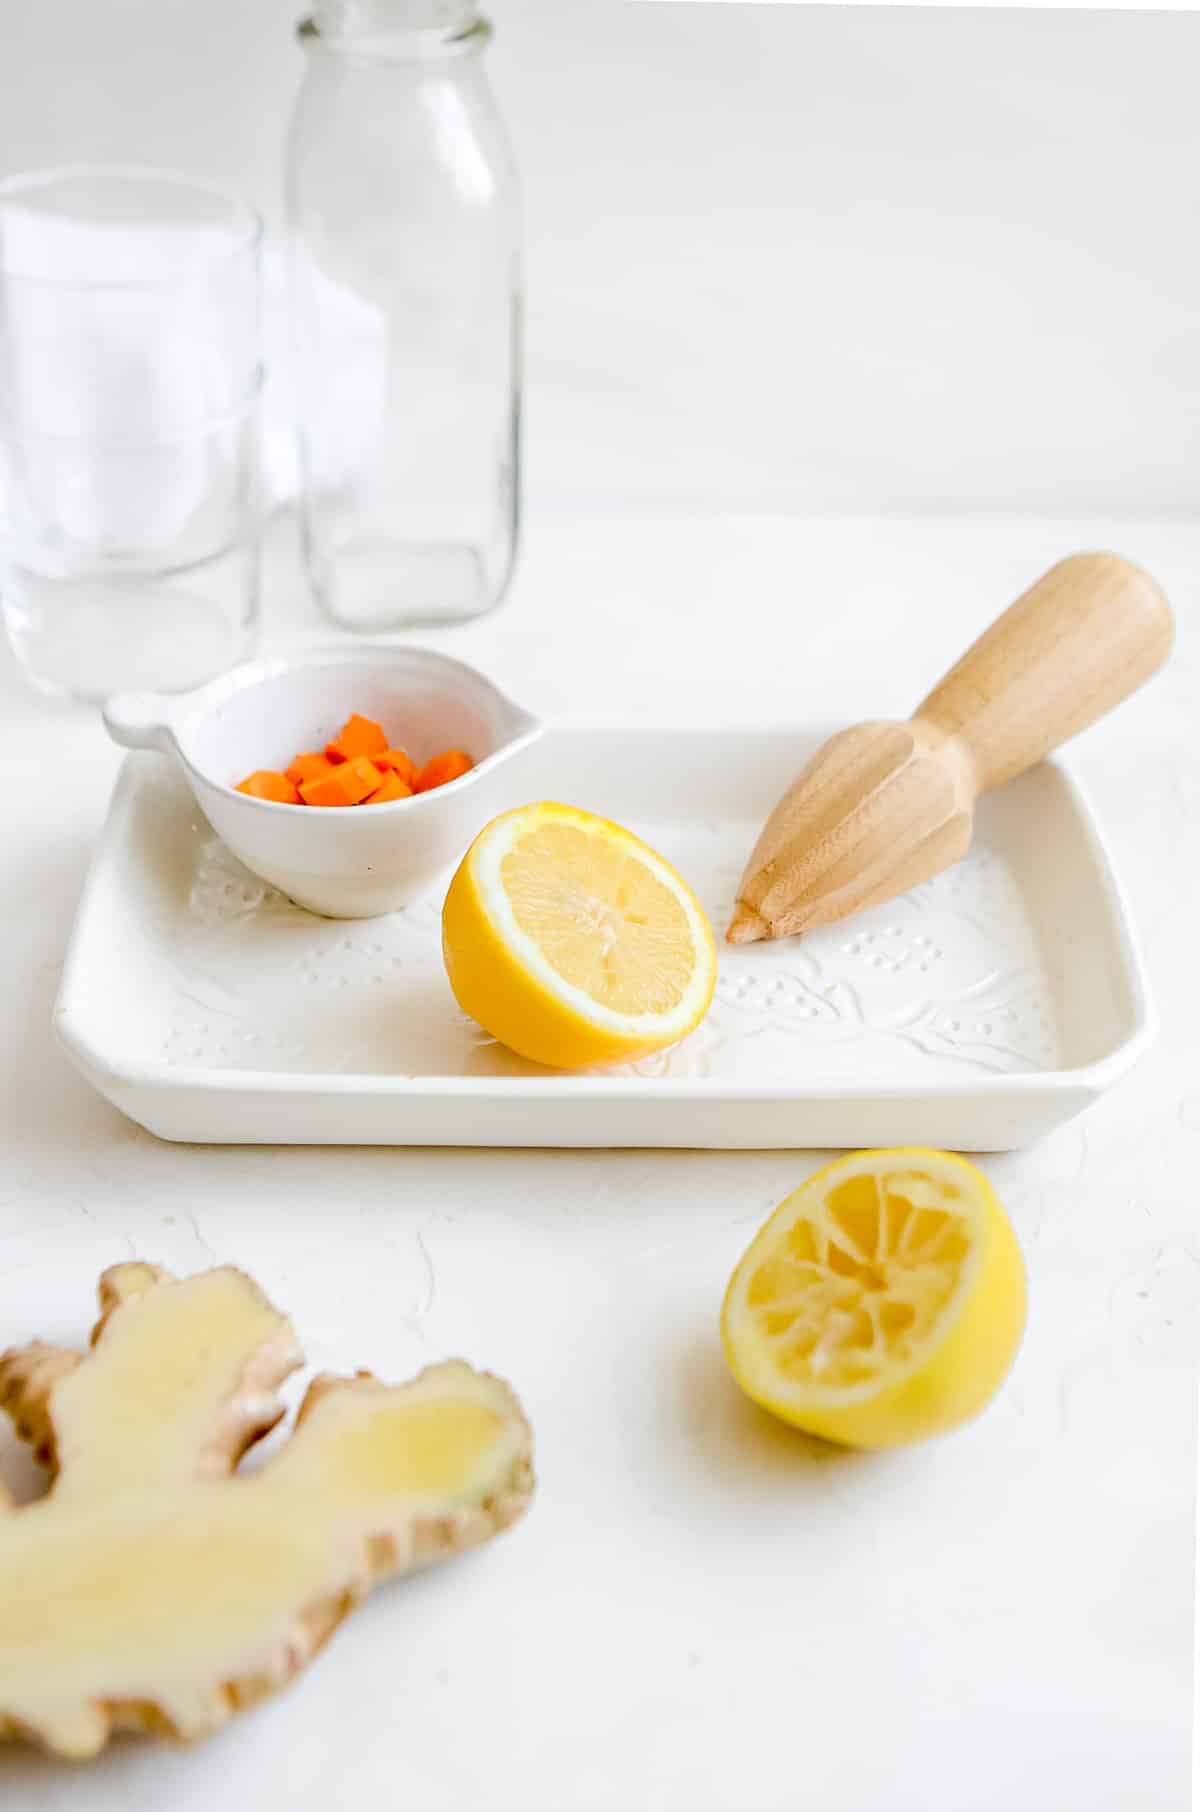 Ingredients to make a turmeric ginger smoothie including lemons, sliced ginger and turmeric on a decorative tray.